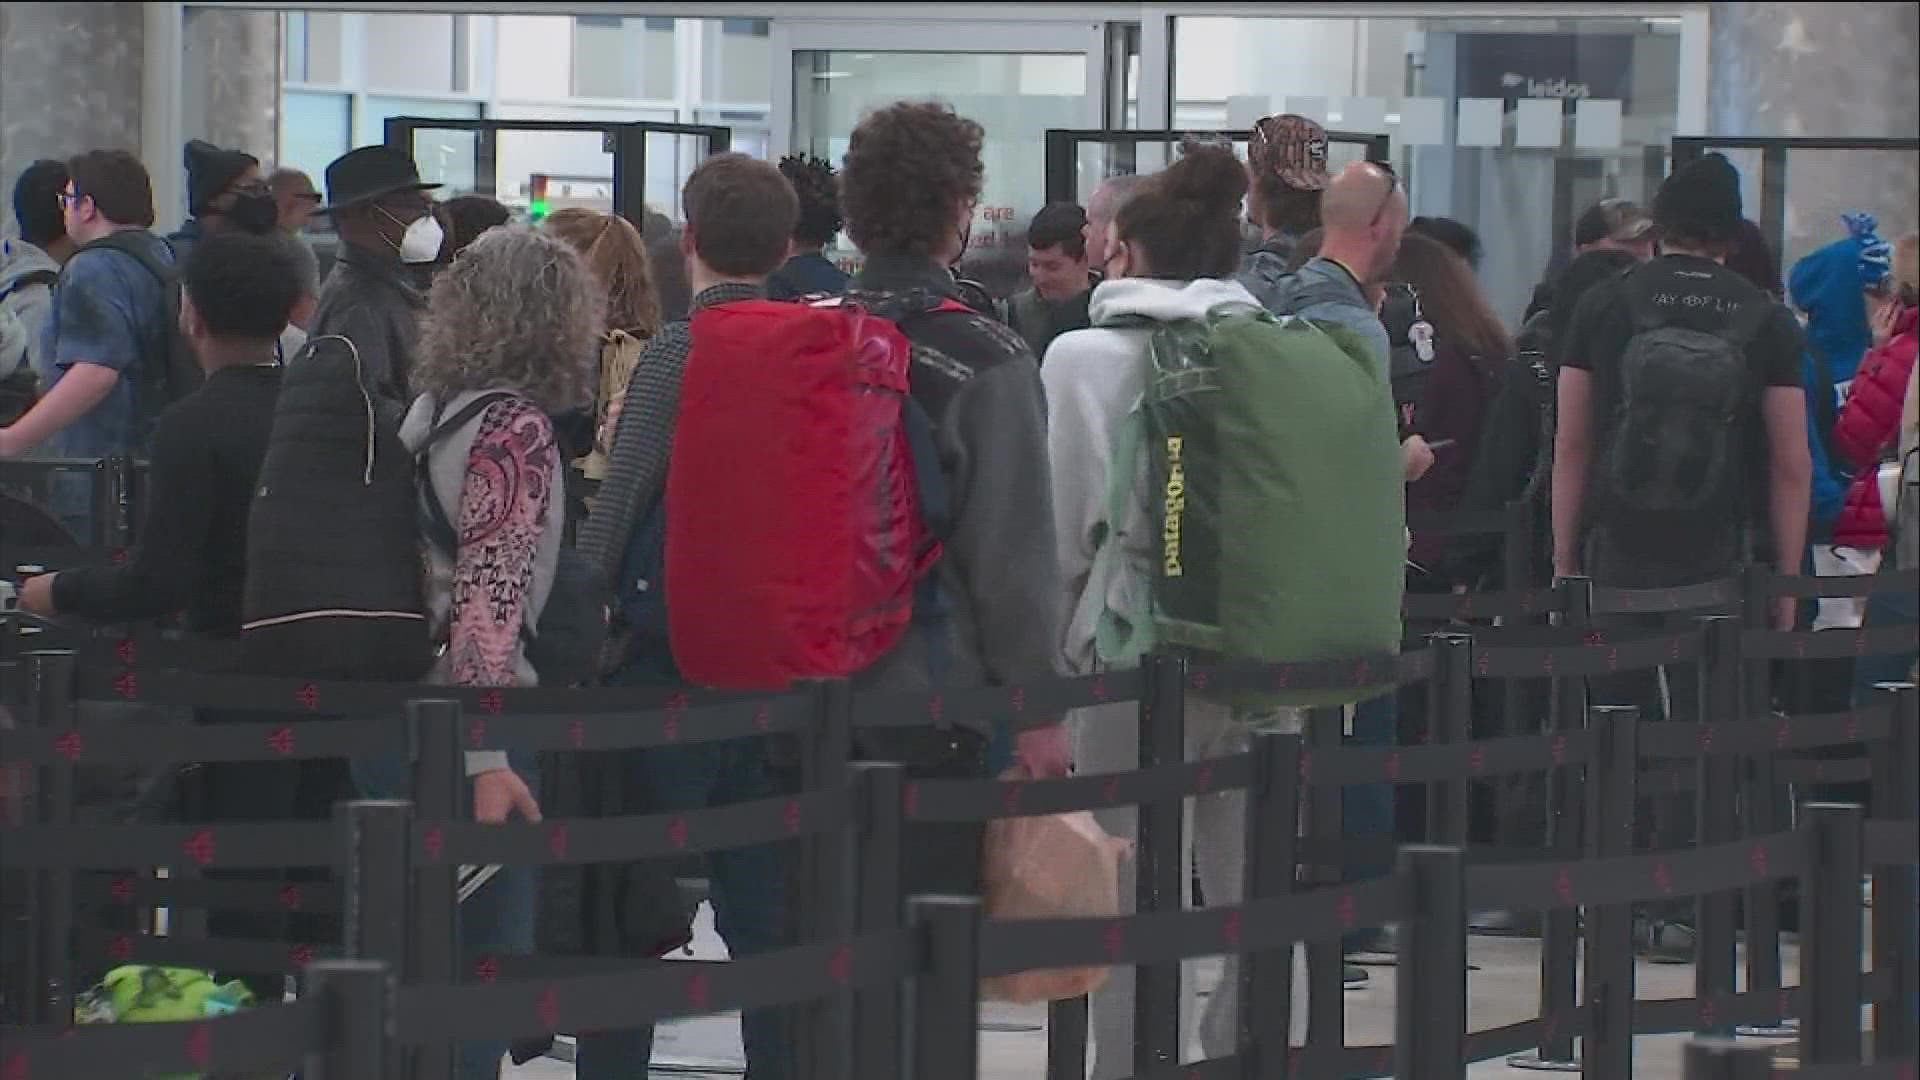 Hartsfield-Jackson experienced slight delays early Monday morning as holiday travelers return to daily routines.